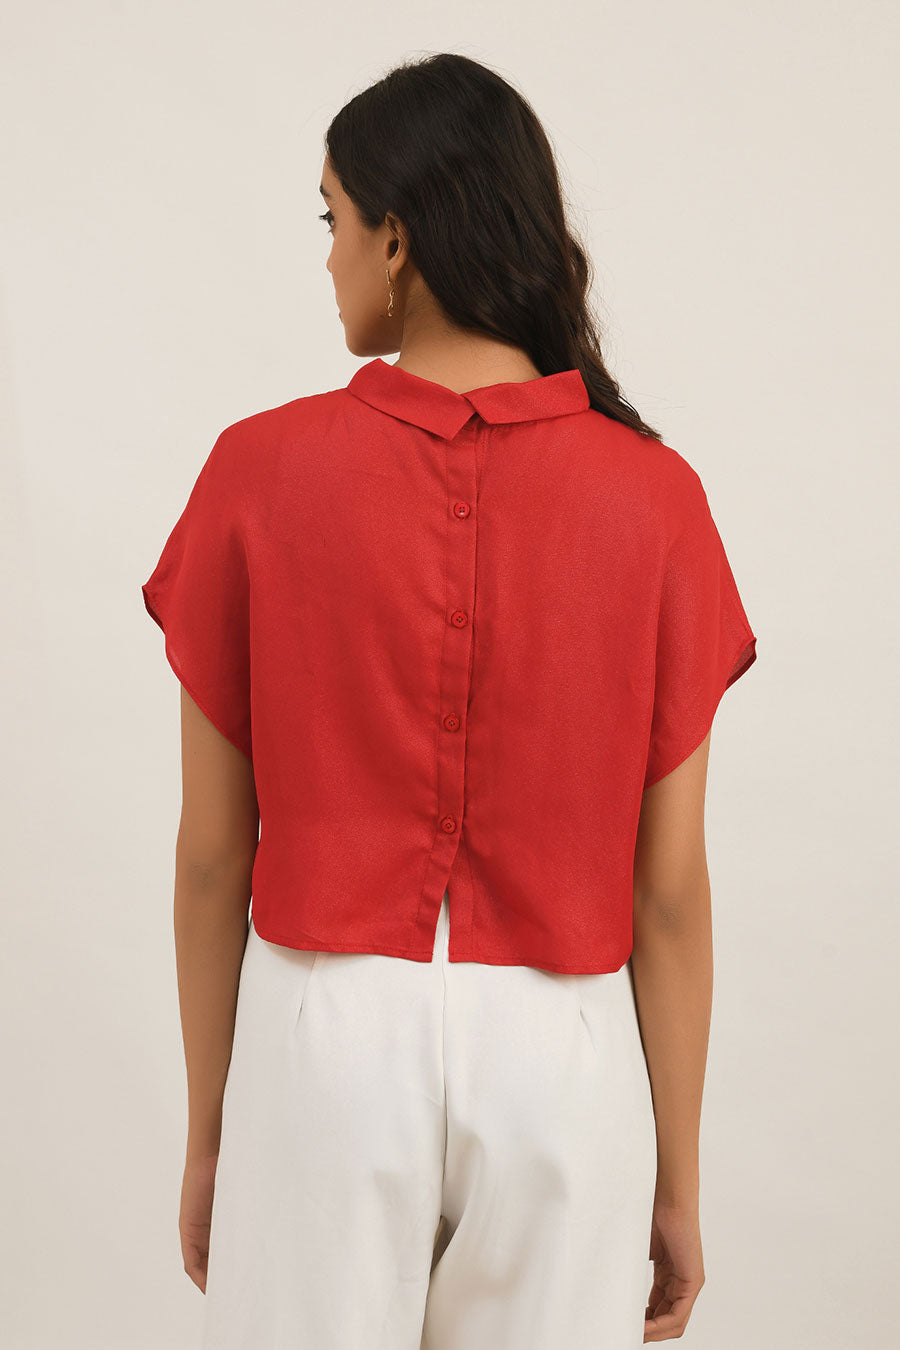 Red Top With Back Button